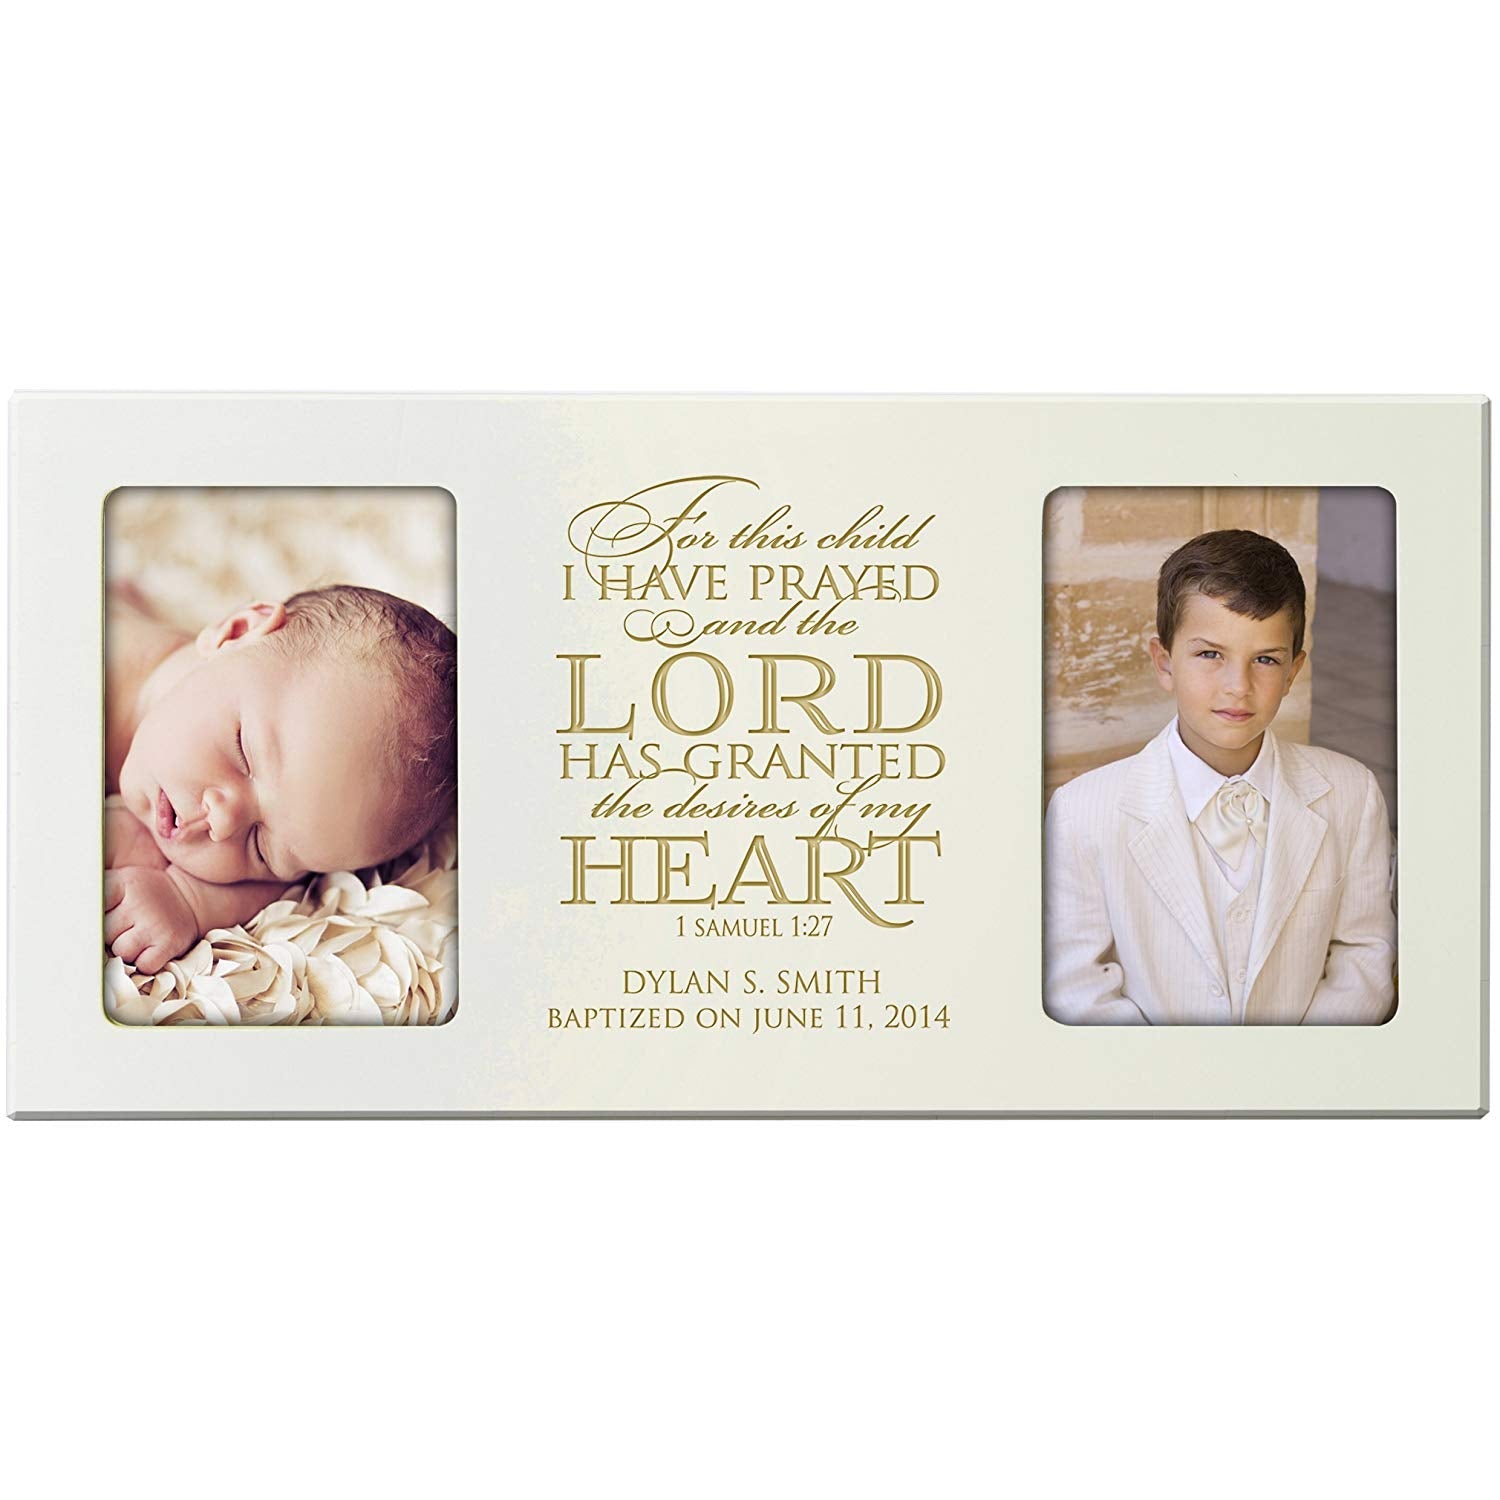 Personalized First Communion Photo Frame Gift "I Have Prayed" - LifeSong Milestones